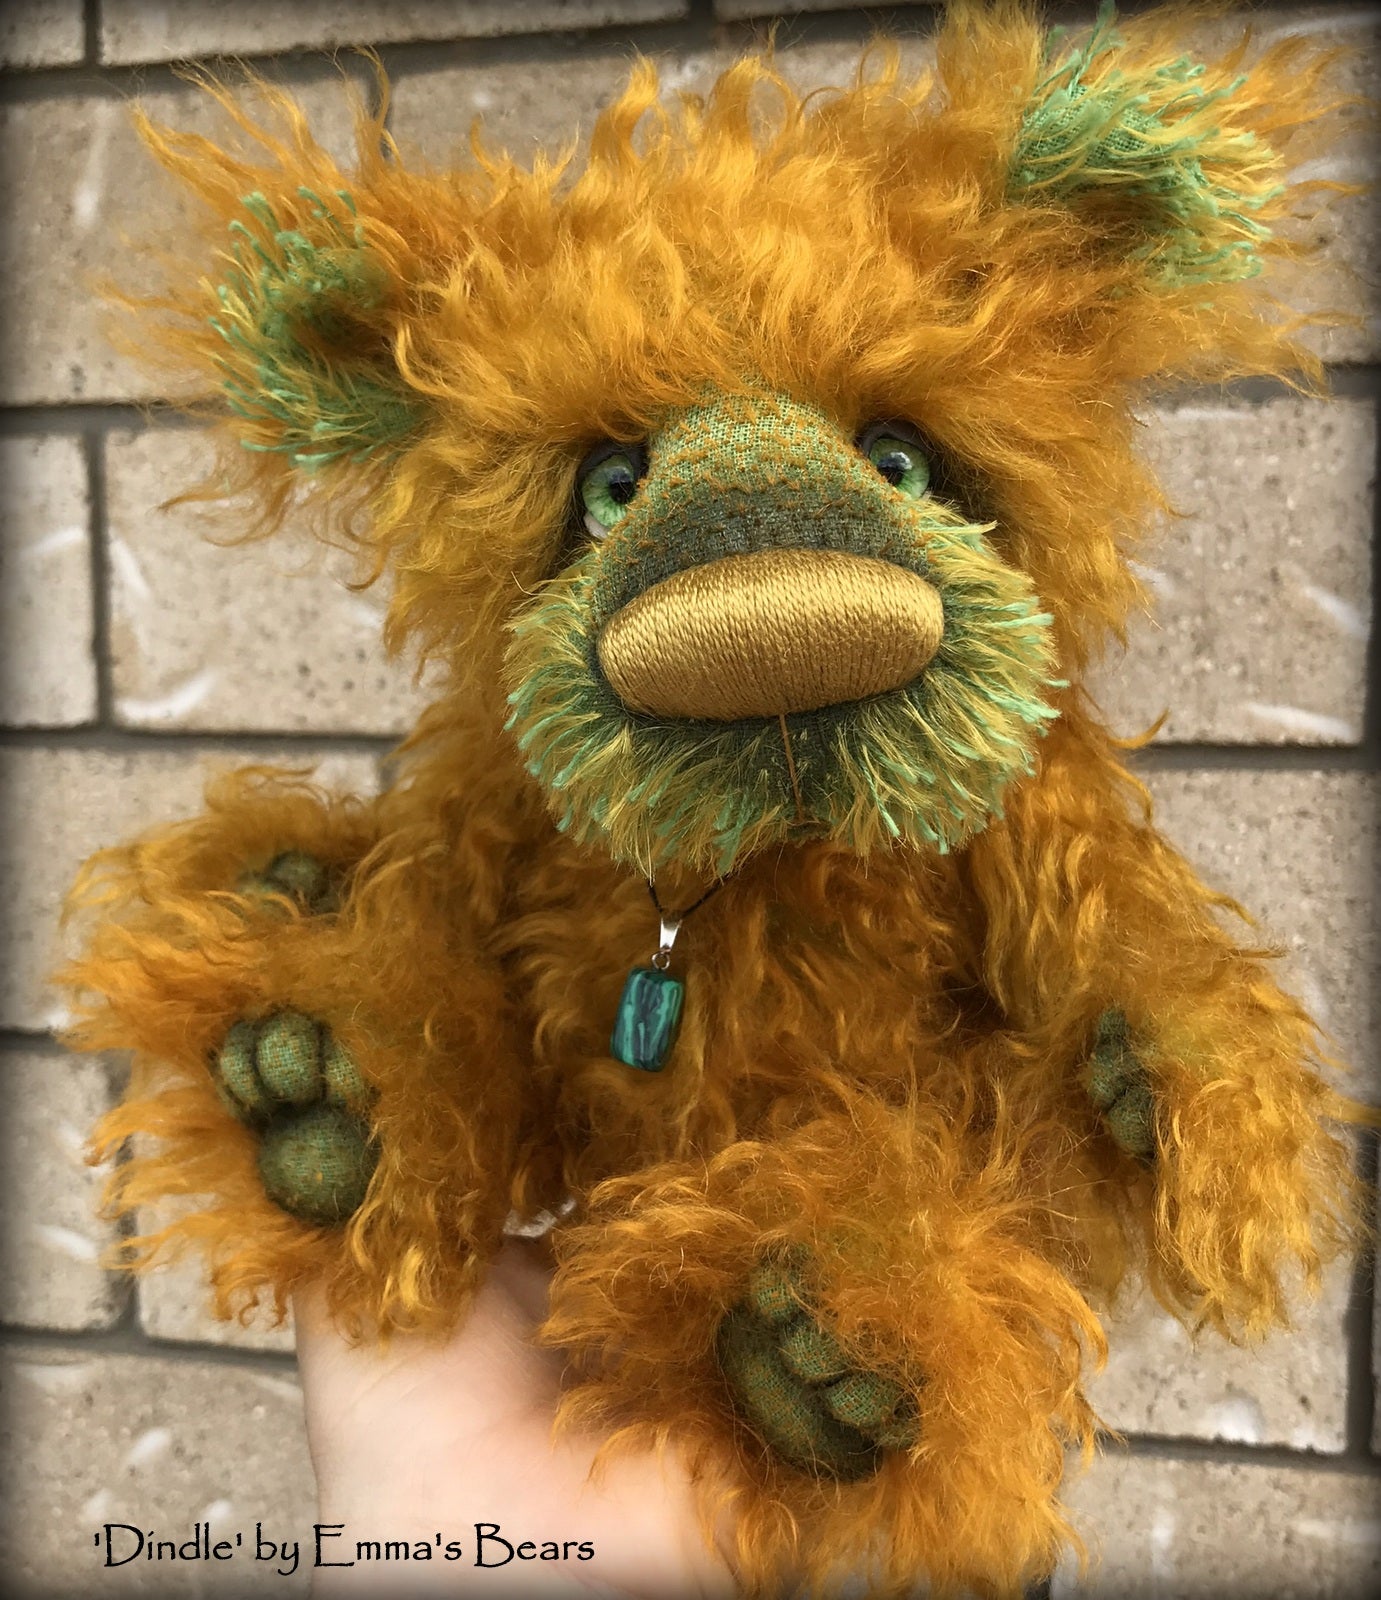 Dindle - 11" Hand Dyed Mohair Artist Bear by Emma's Bears - OOAK